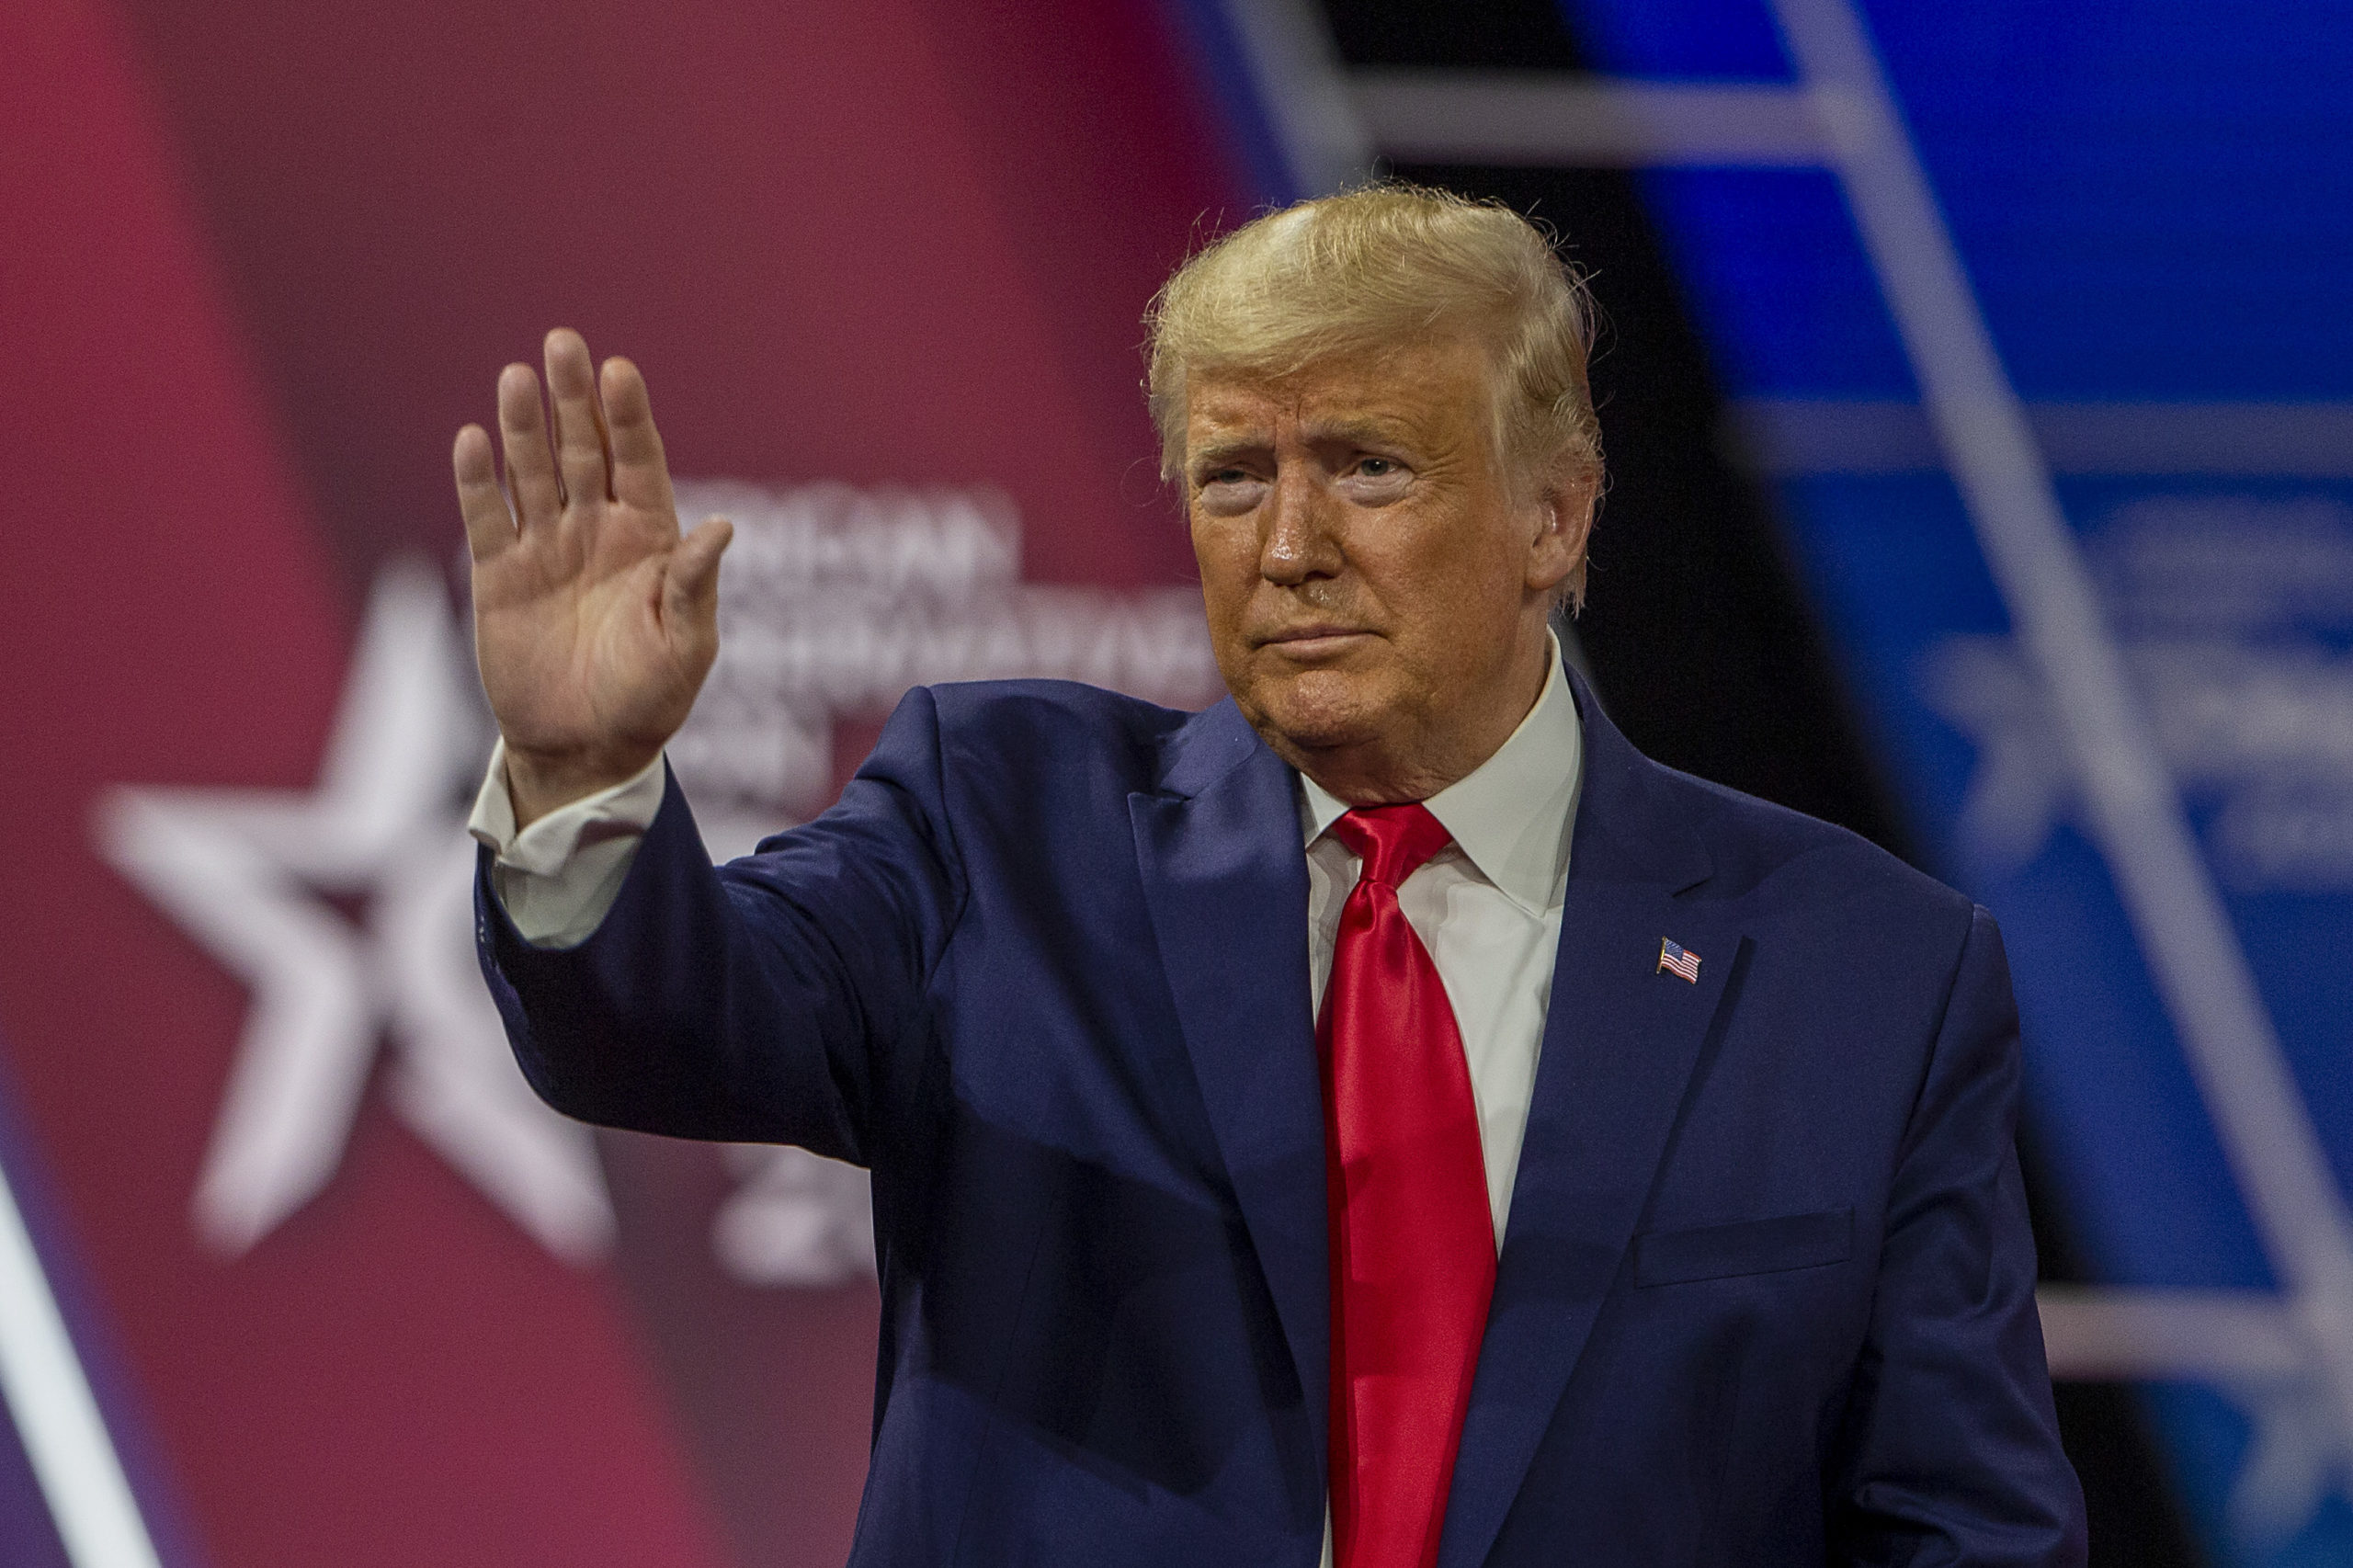 NATIONAL HARBOR, MARYLAND - FEBRUARY 29: President Donald Trump acknowledges the crowd during the annual Conservative Political Action Conference (CPAC) at Gaylord National Resort & Convention Center February 29, 2020 in National Harbor, Maryland. Conservatives gather at the annual event to discuss their agenda. (Photo by Tasos Katopodis/Getty Images)